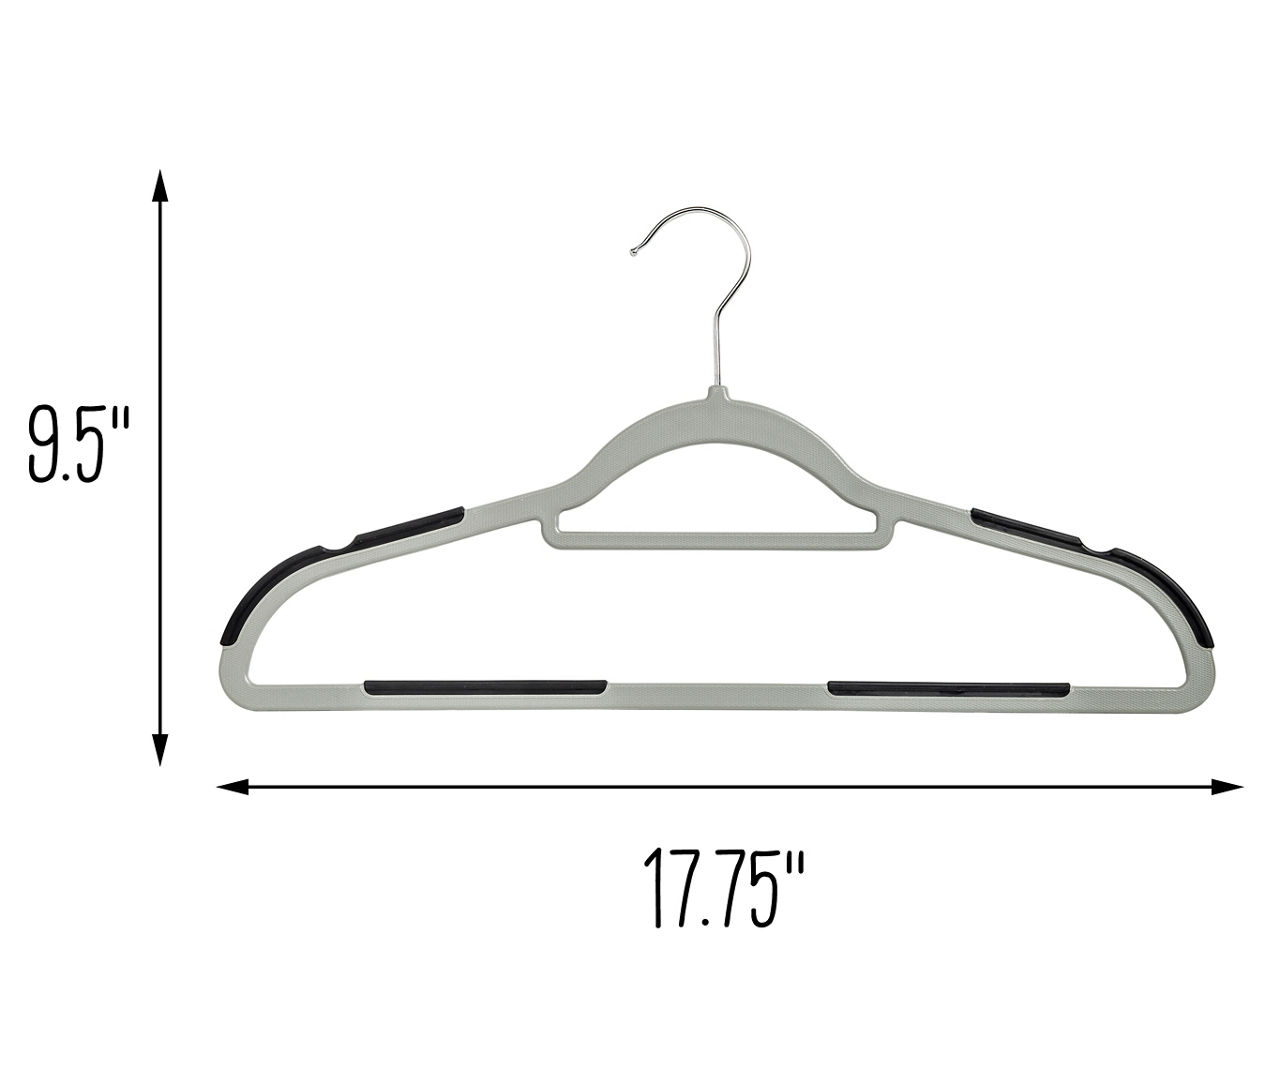 Trueliving Space Saver Clothes Hanger, 4 Count